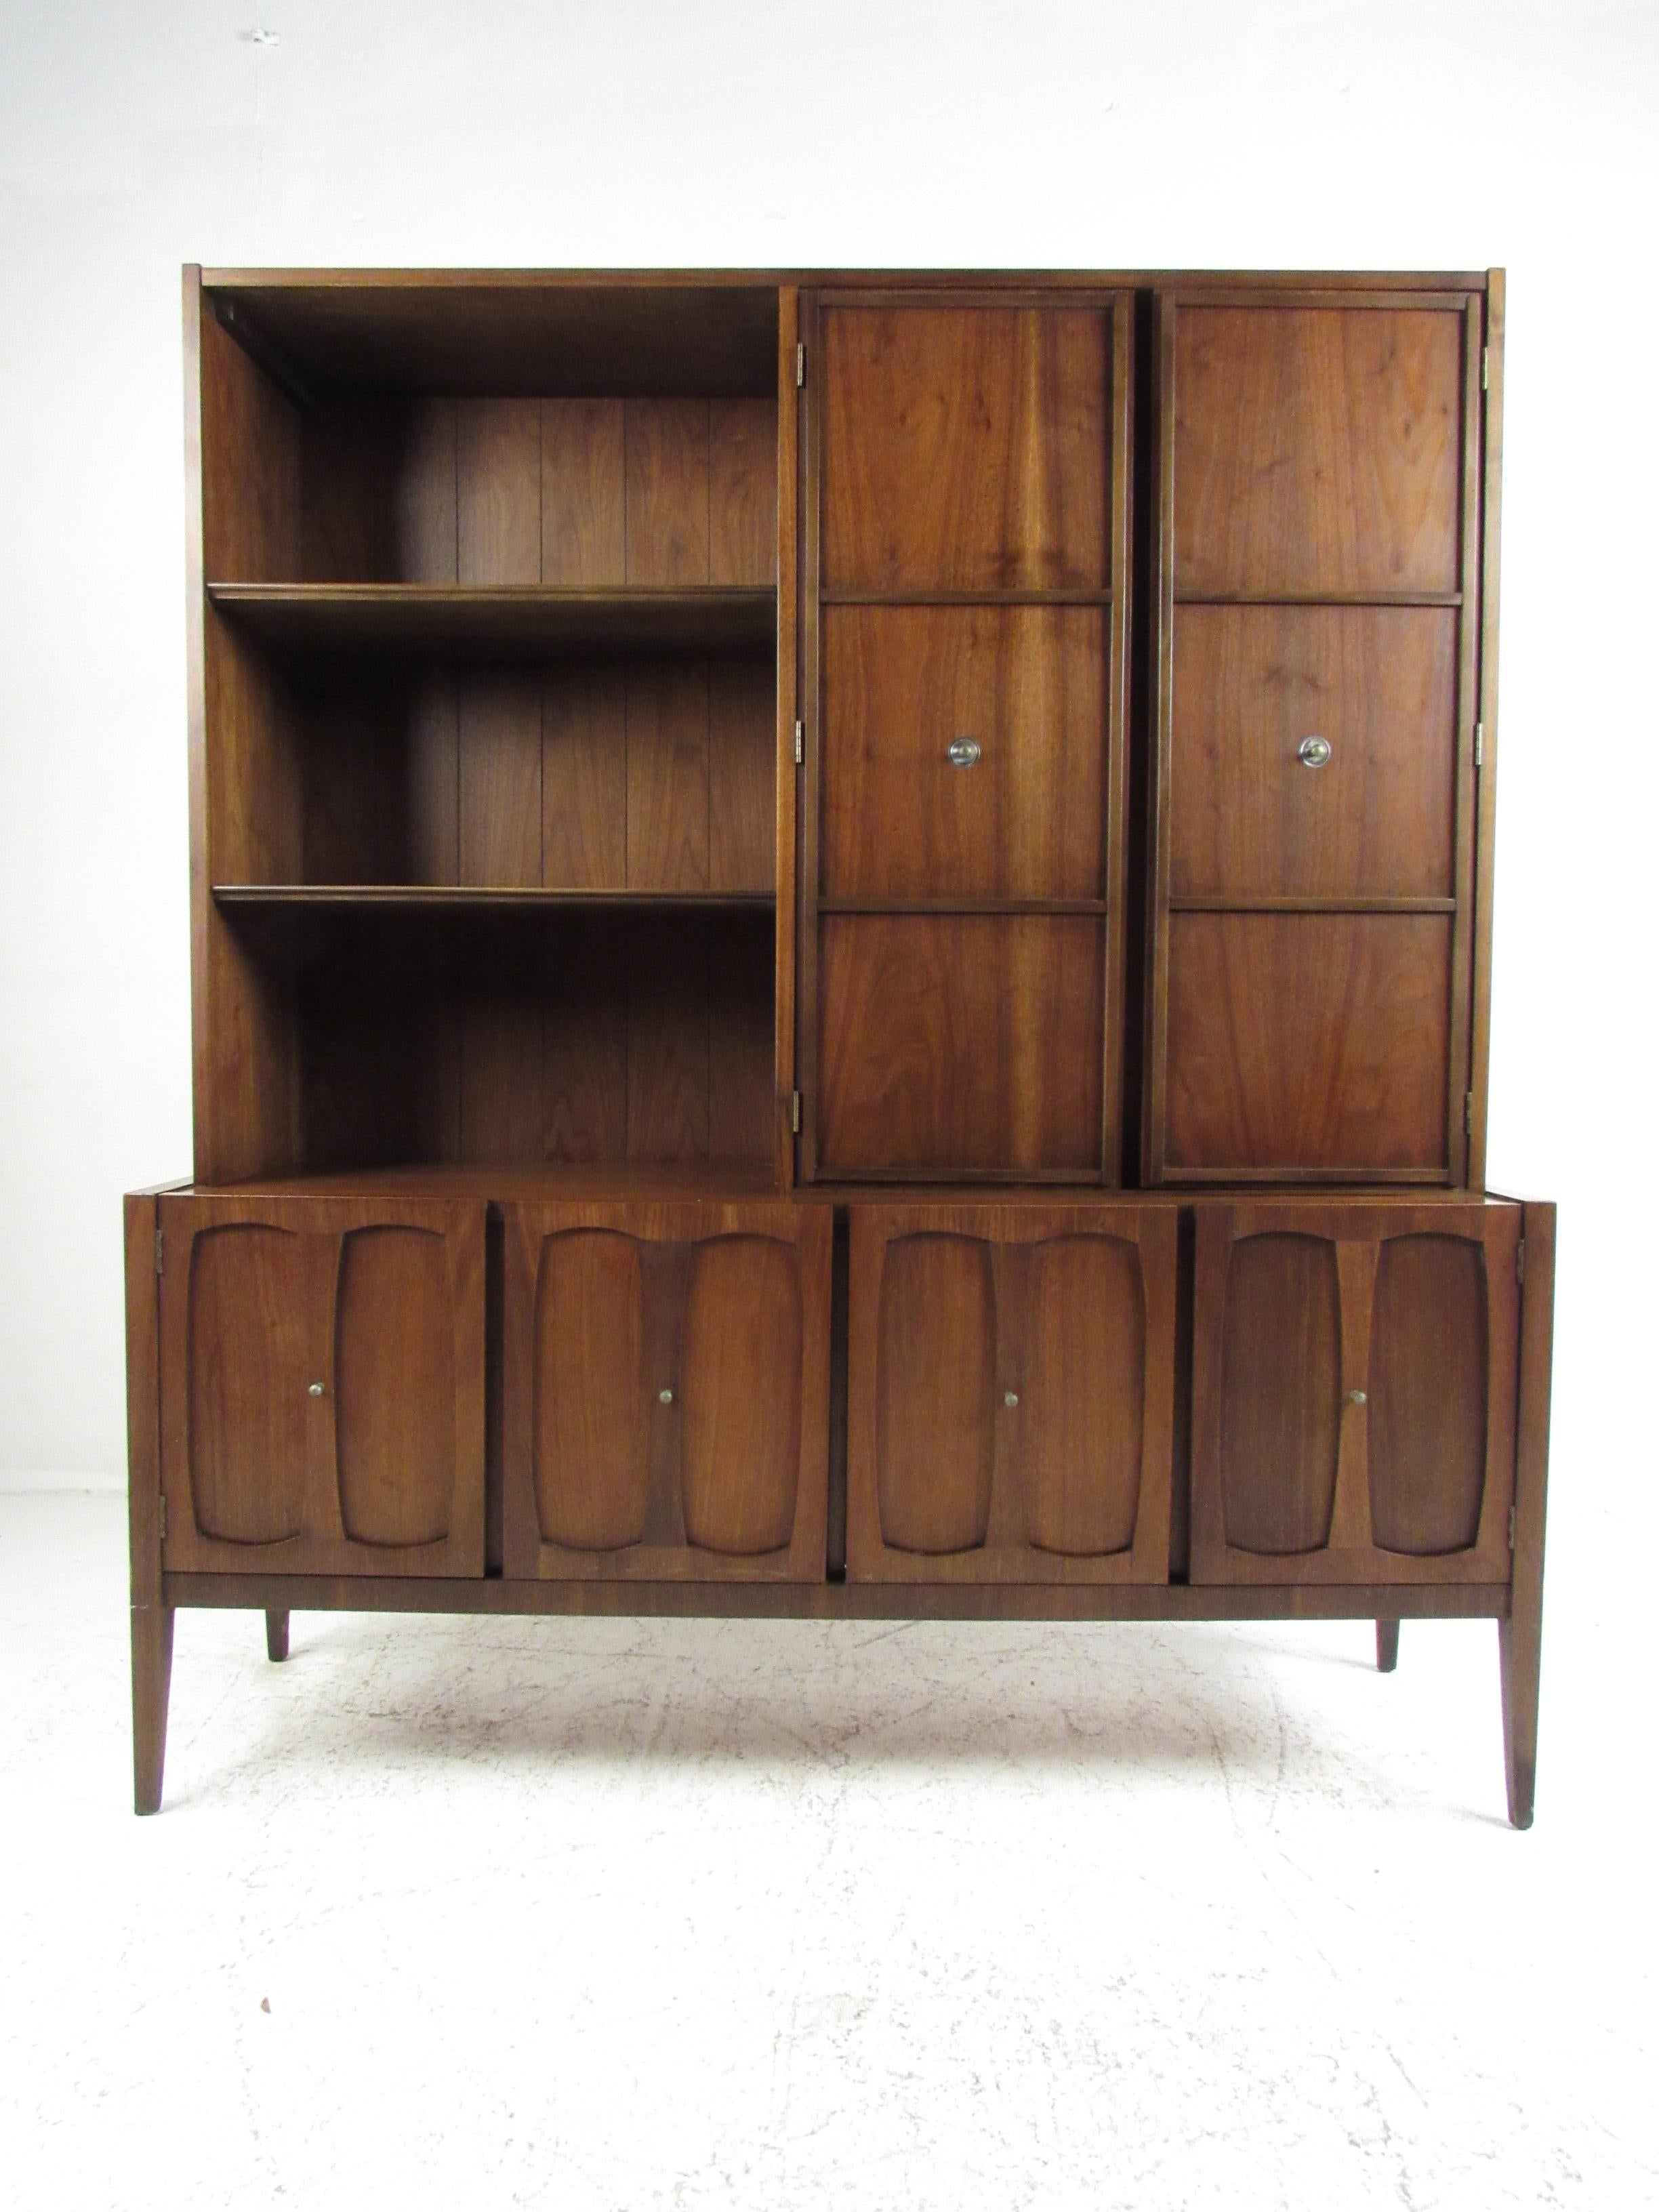 This stunning vintage modern china cabinet features unique carved designs on cabinet door fronts and sculpted pulls. A well-made case piece that functions as a buffet, bookcase, or display case. Sleek design with tapered legs, an elegant walnut